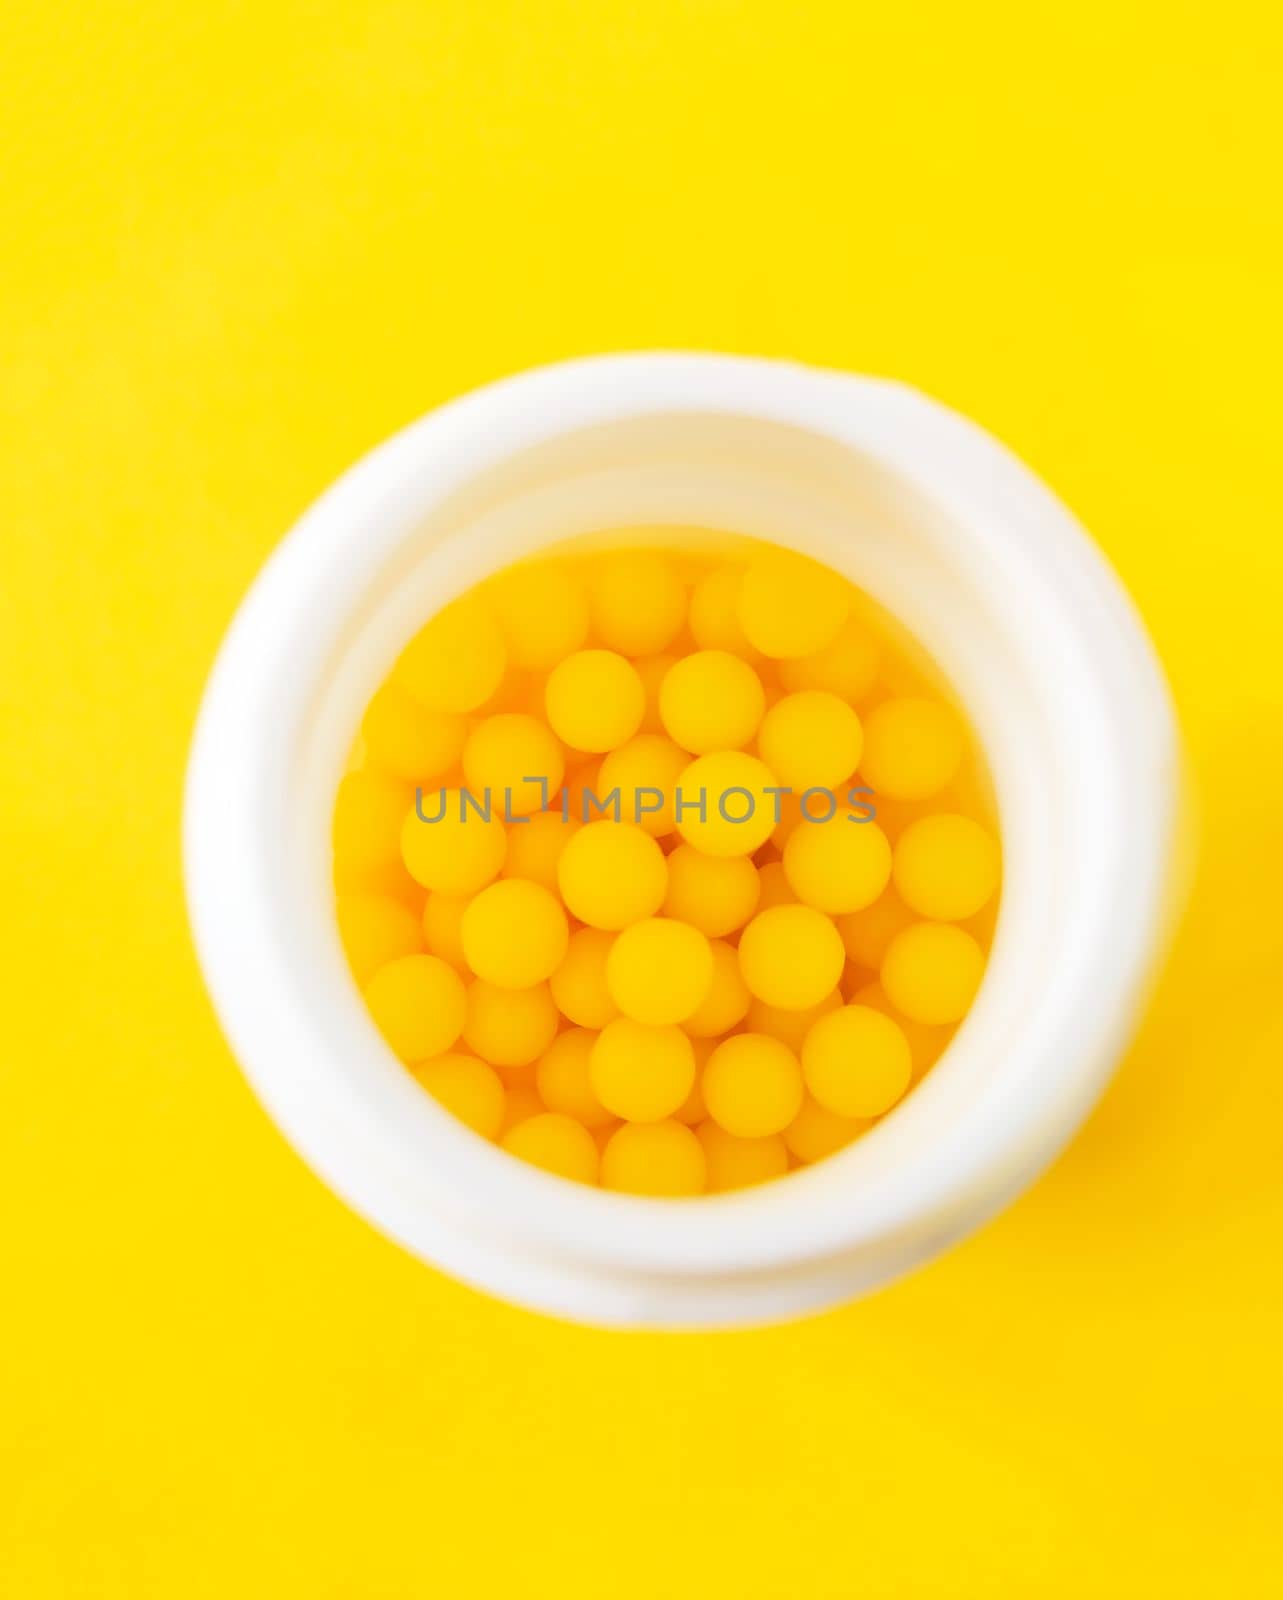 Pills of vitamin C in the opened white plastic container on bright yellow background. by nightlyviolet